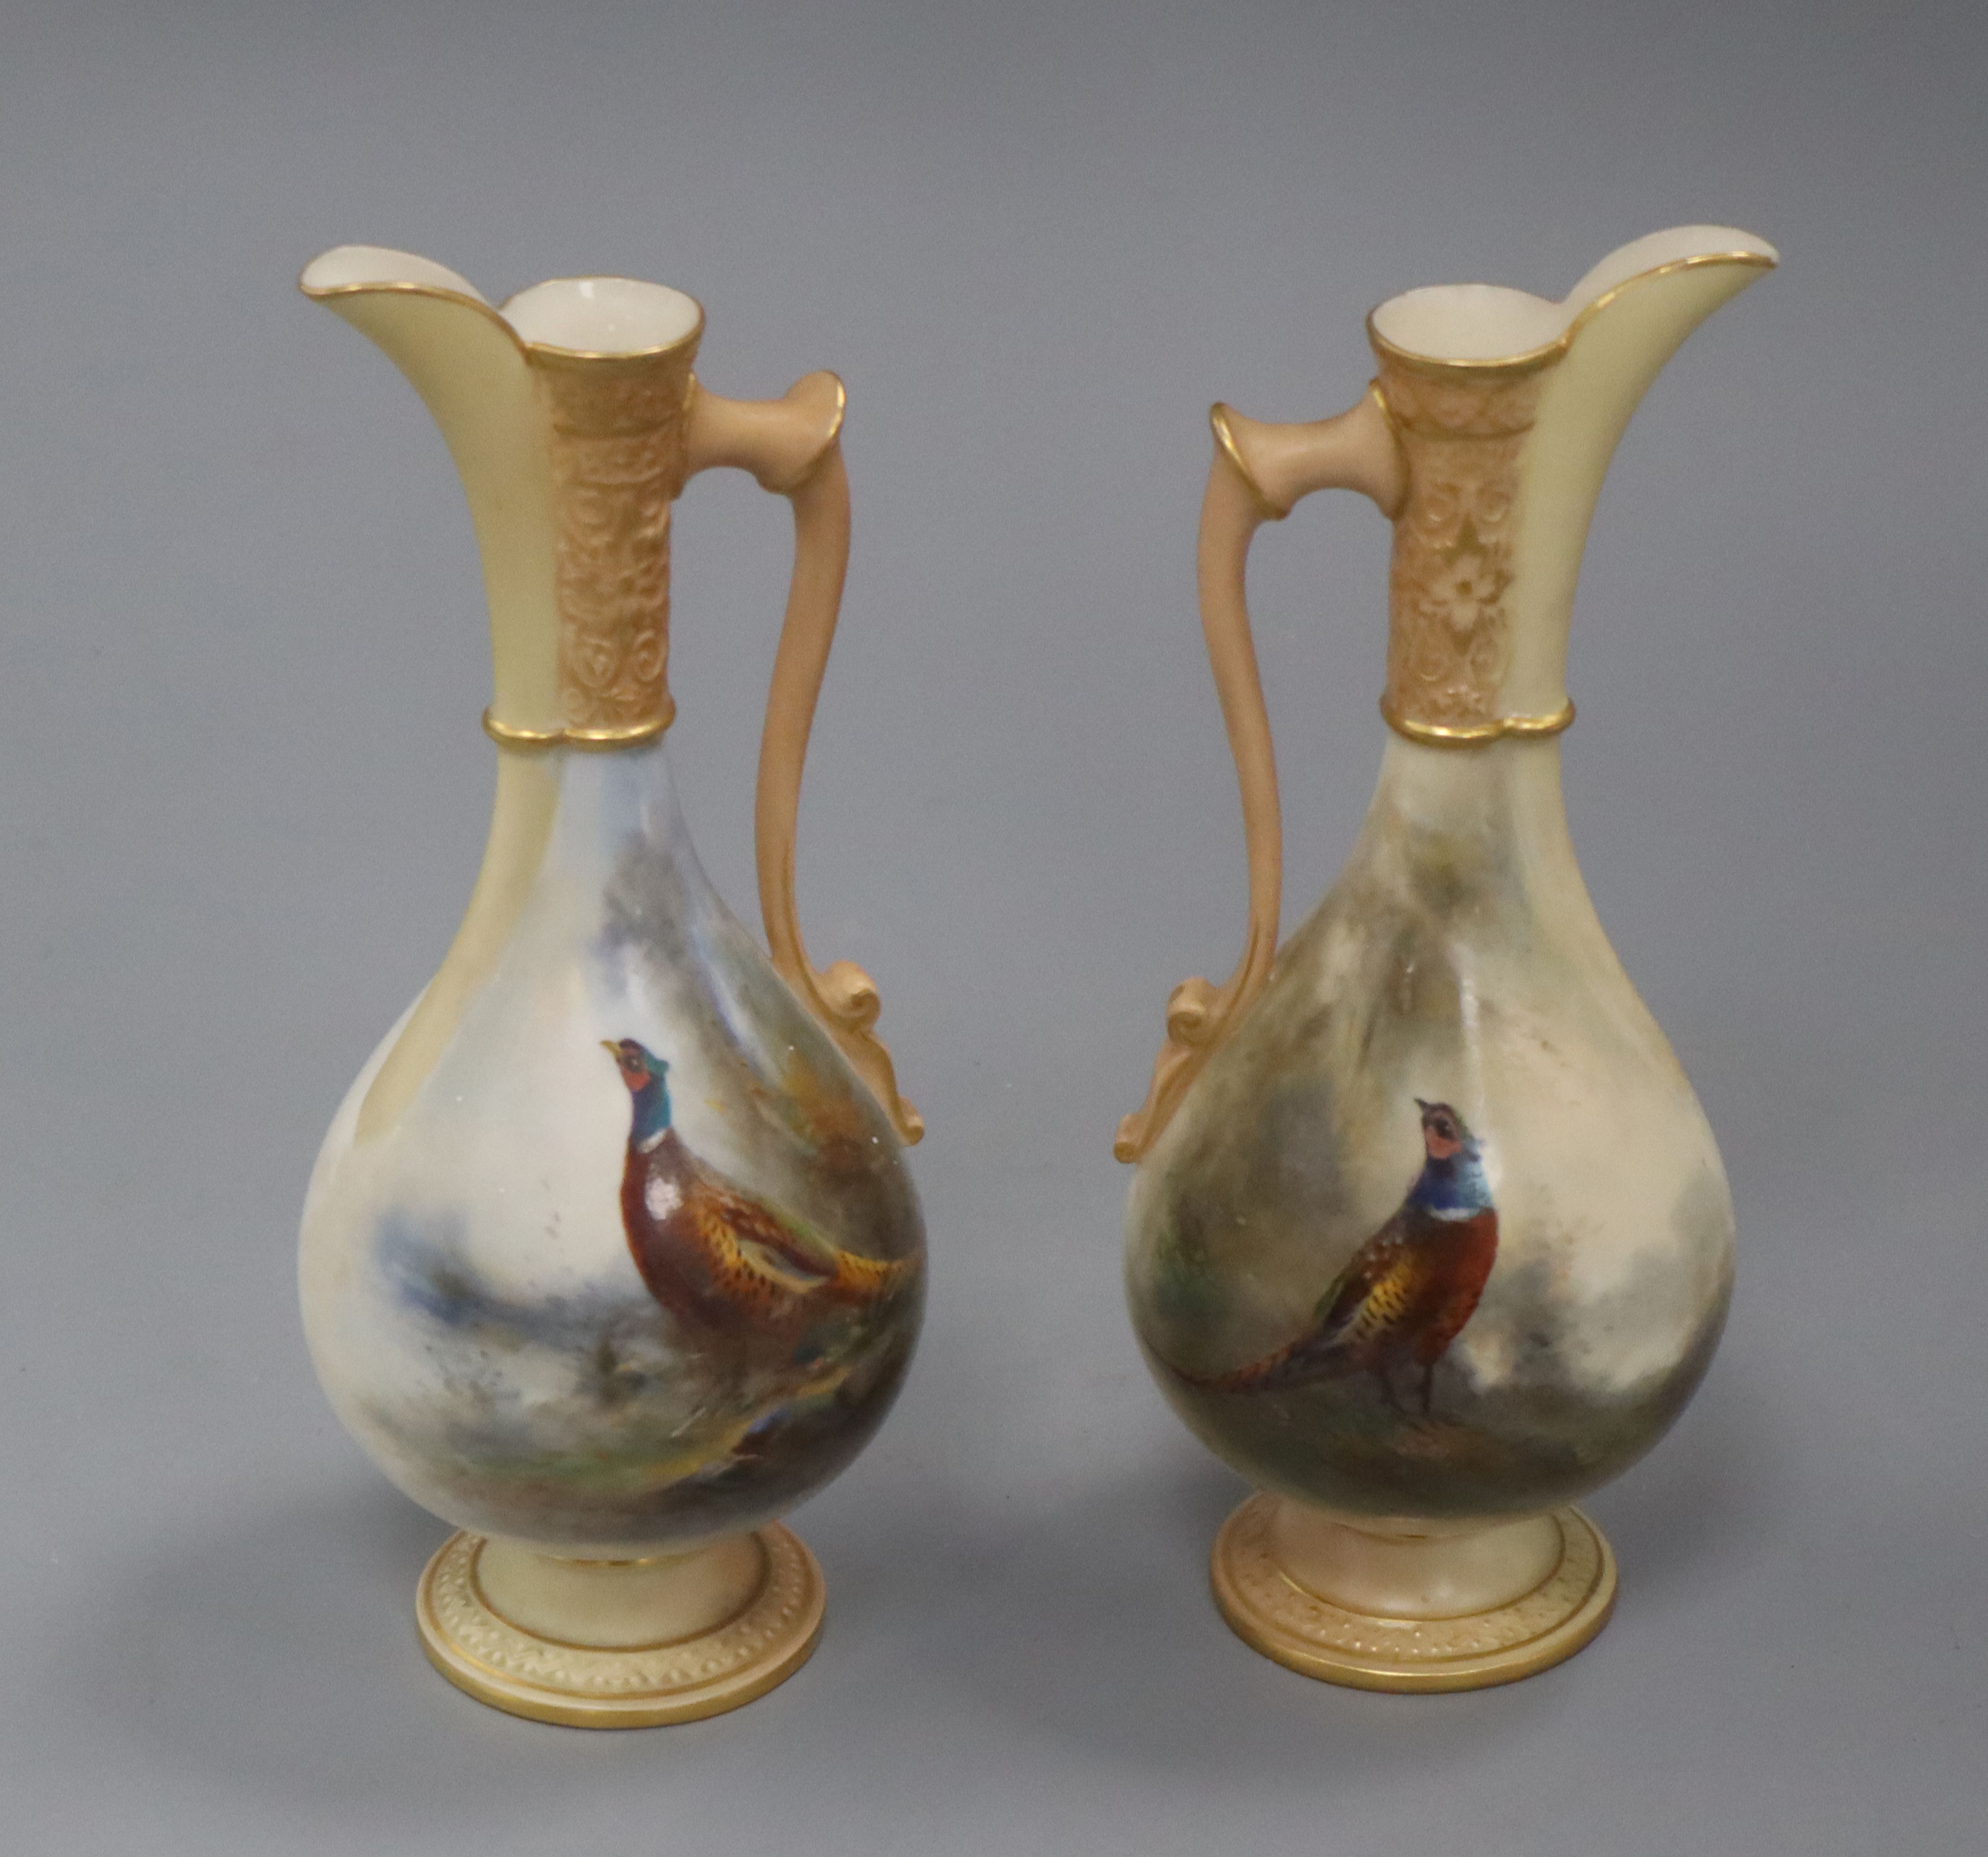 James Shinton for Royal Worcester. A pair of ewers height 18cm